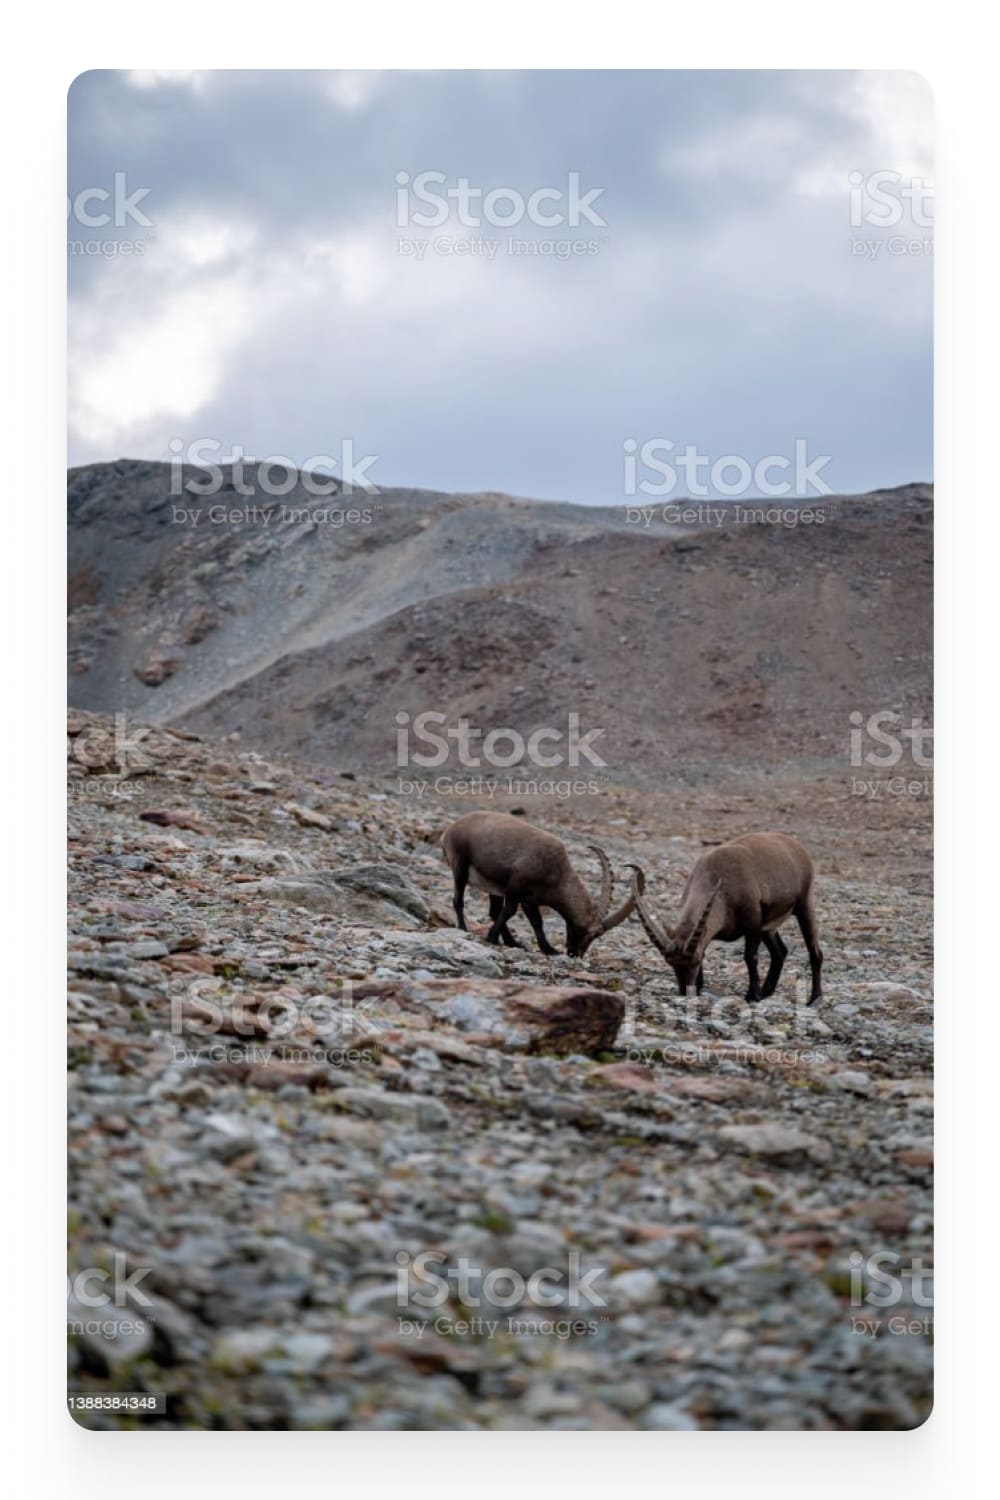 Photo of mountain goats in the mountains.